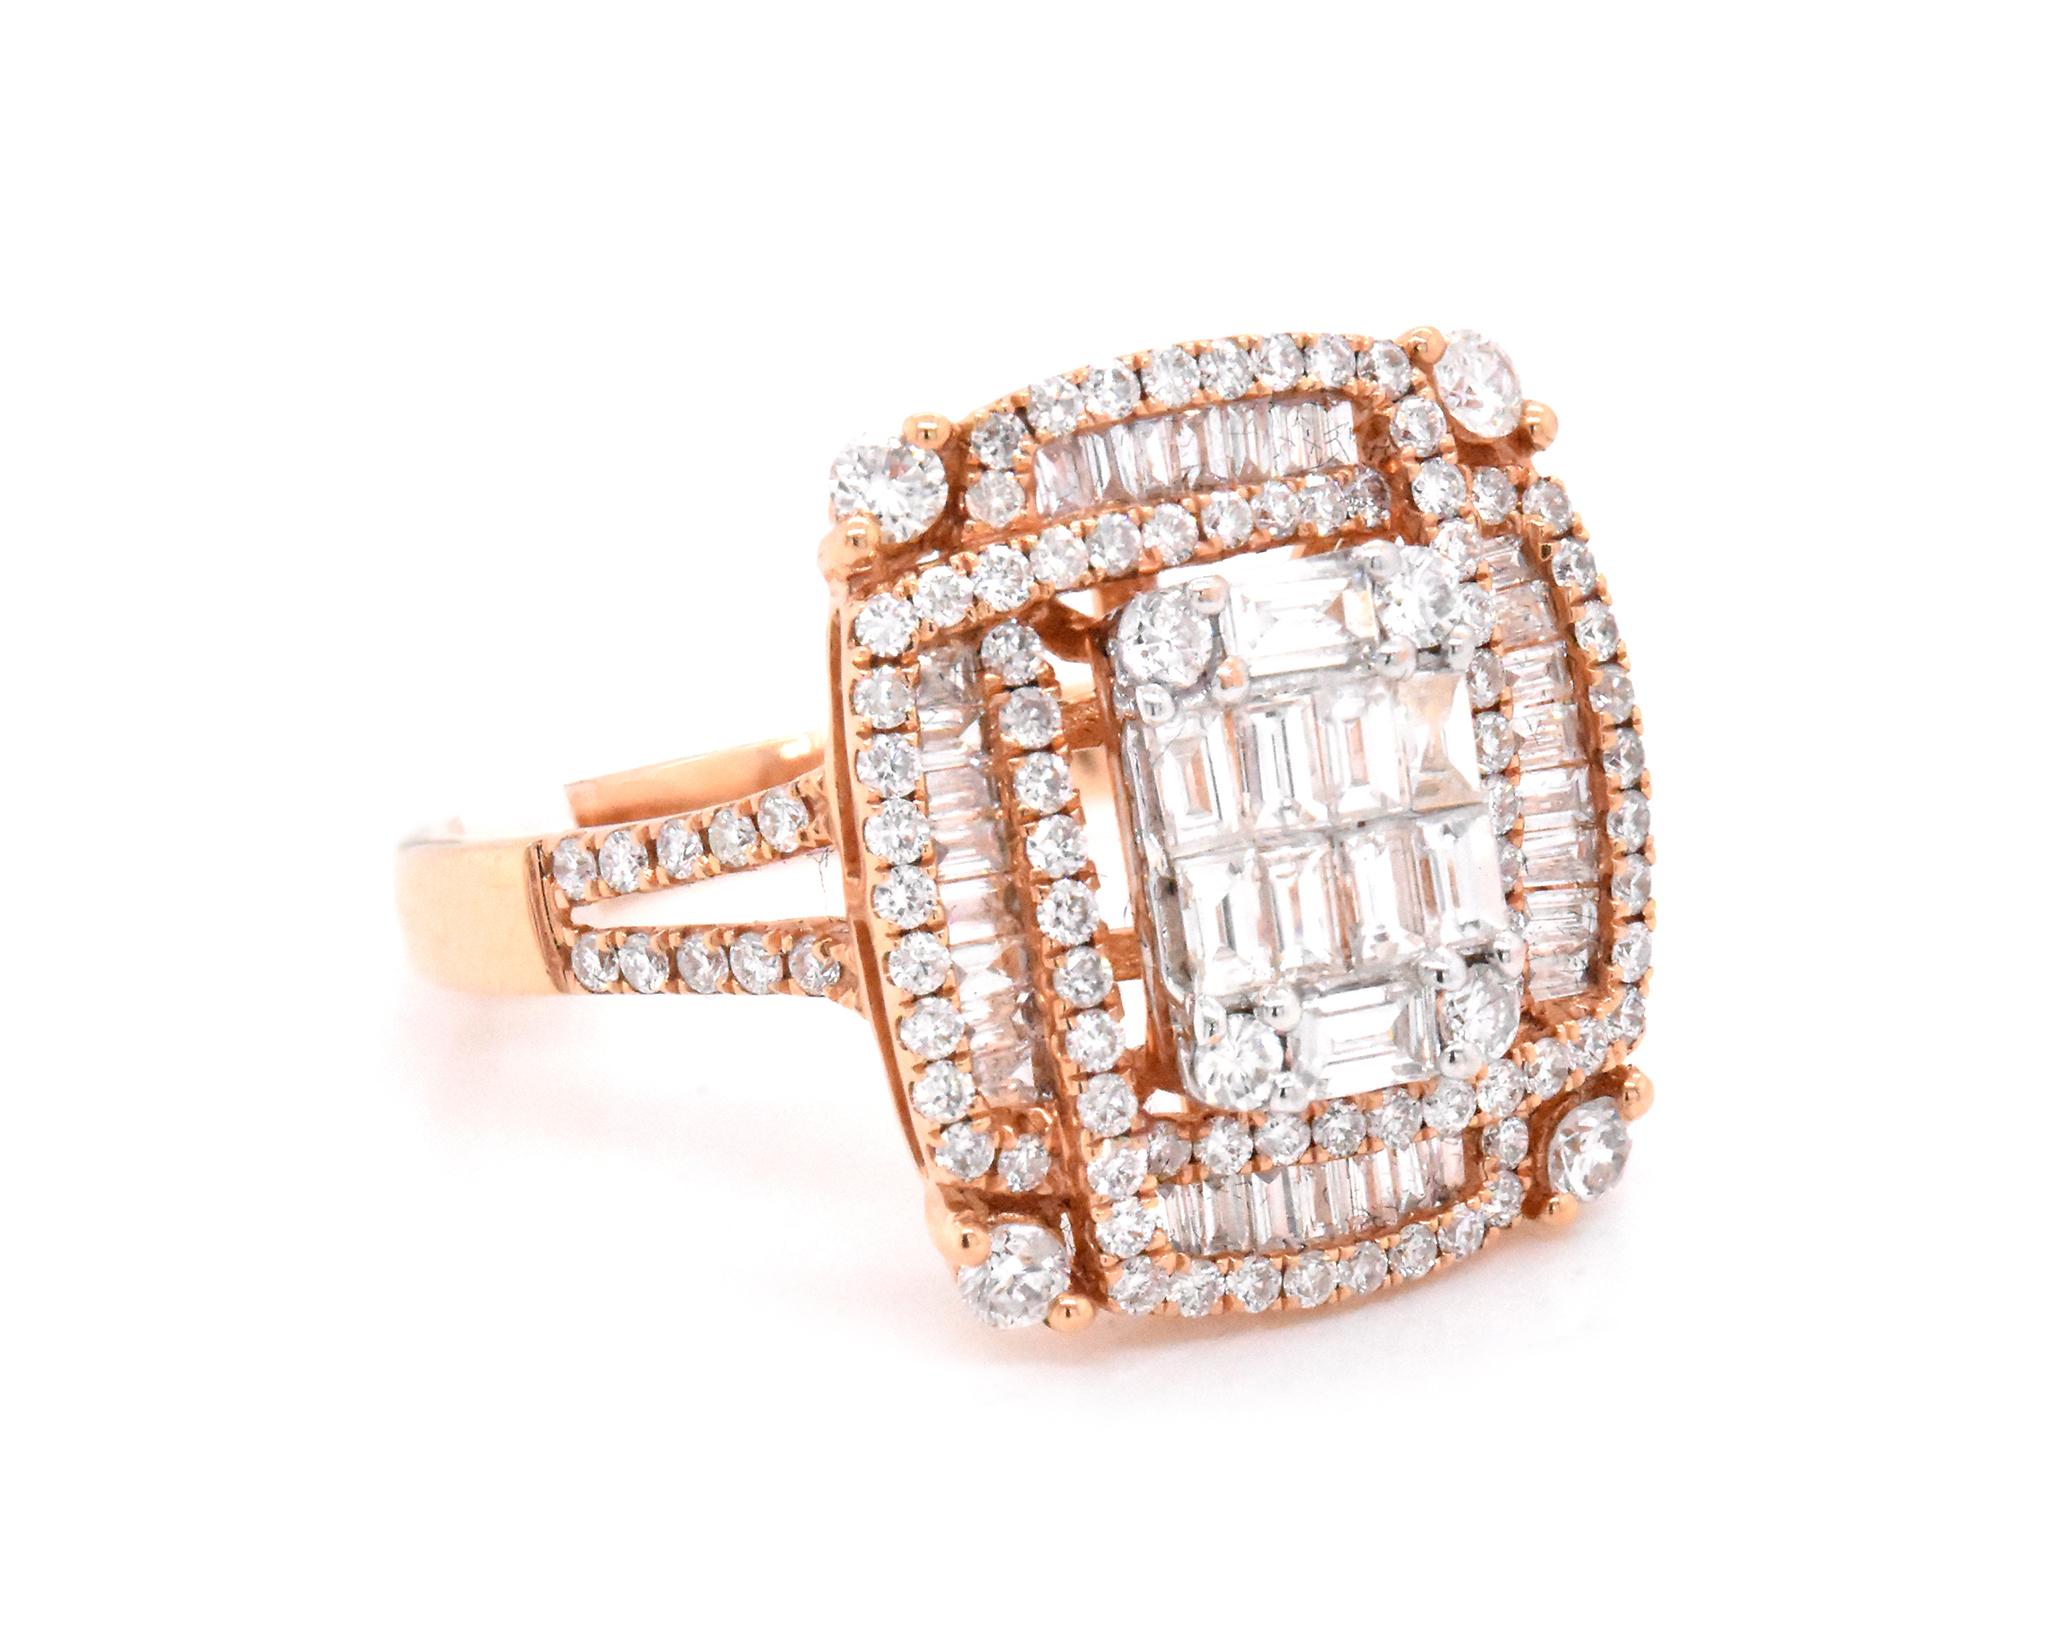 Designer: Custom
Material: 18k rose gold
Diamonds: 144 round cut = 1.34cttw 
Color: G
Clarity: VS
Size: 7
Dimensions: ring measures 16.7mm wide
Weight: 5.34 grams
